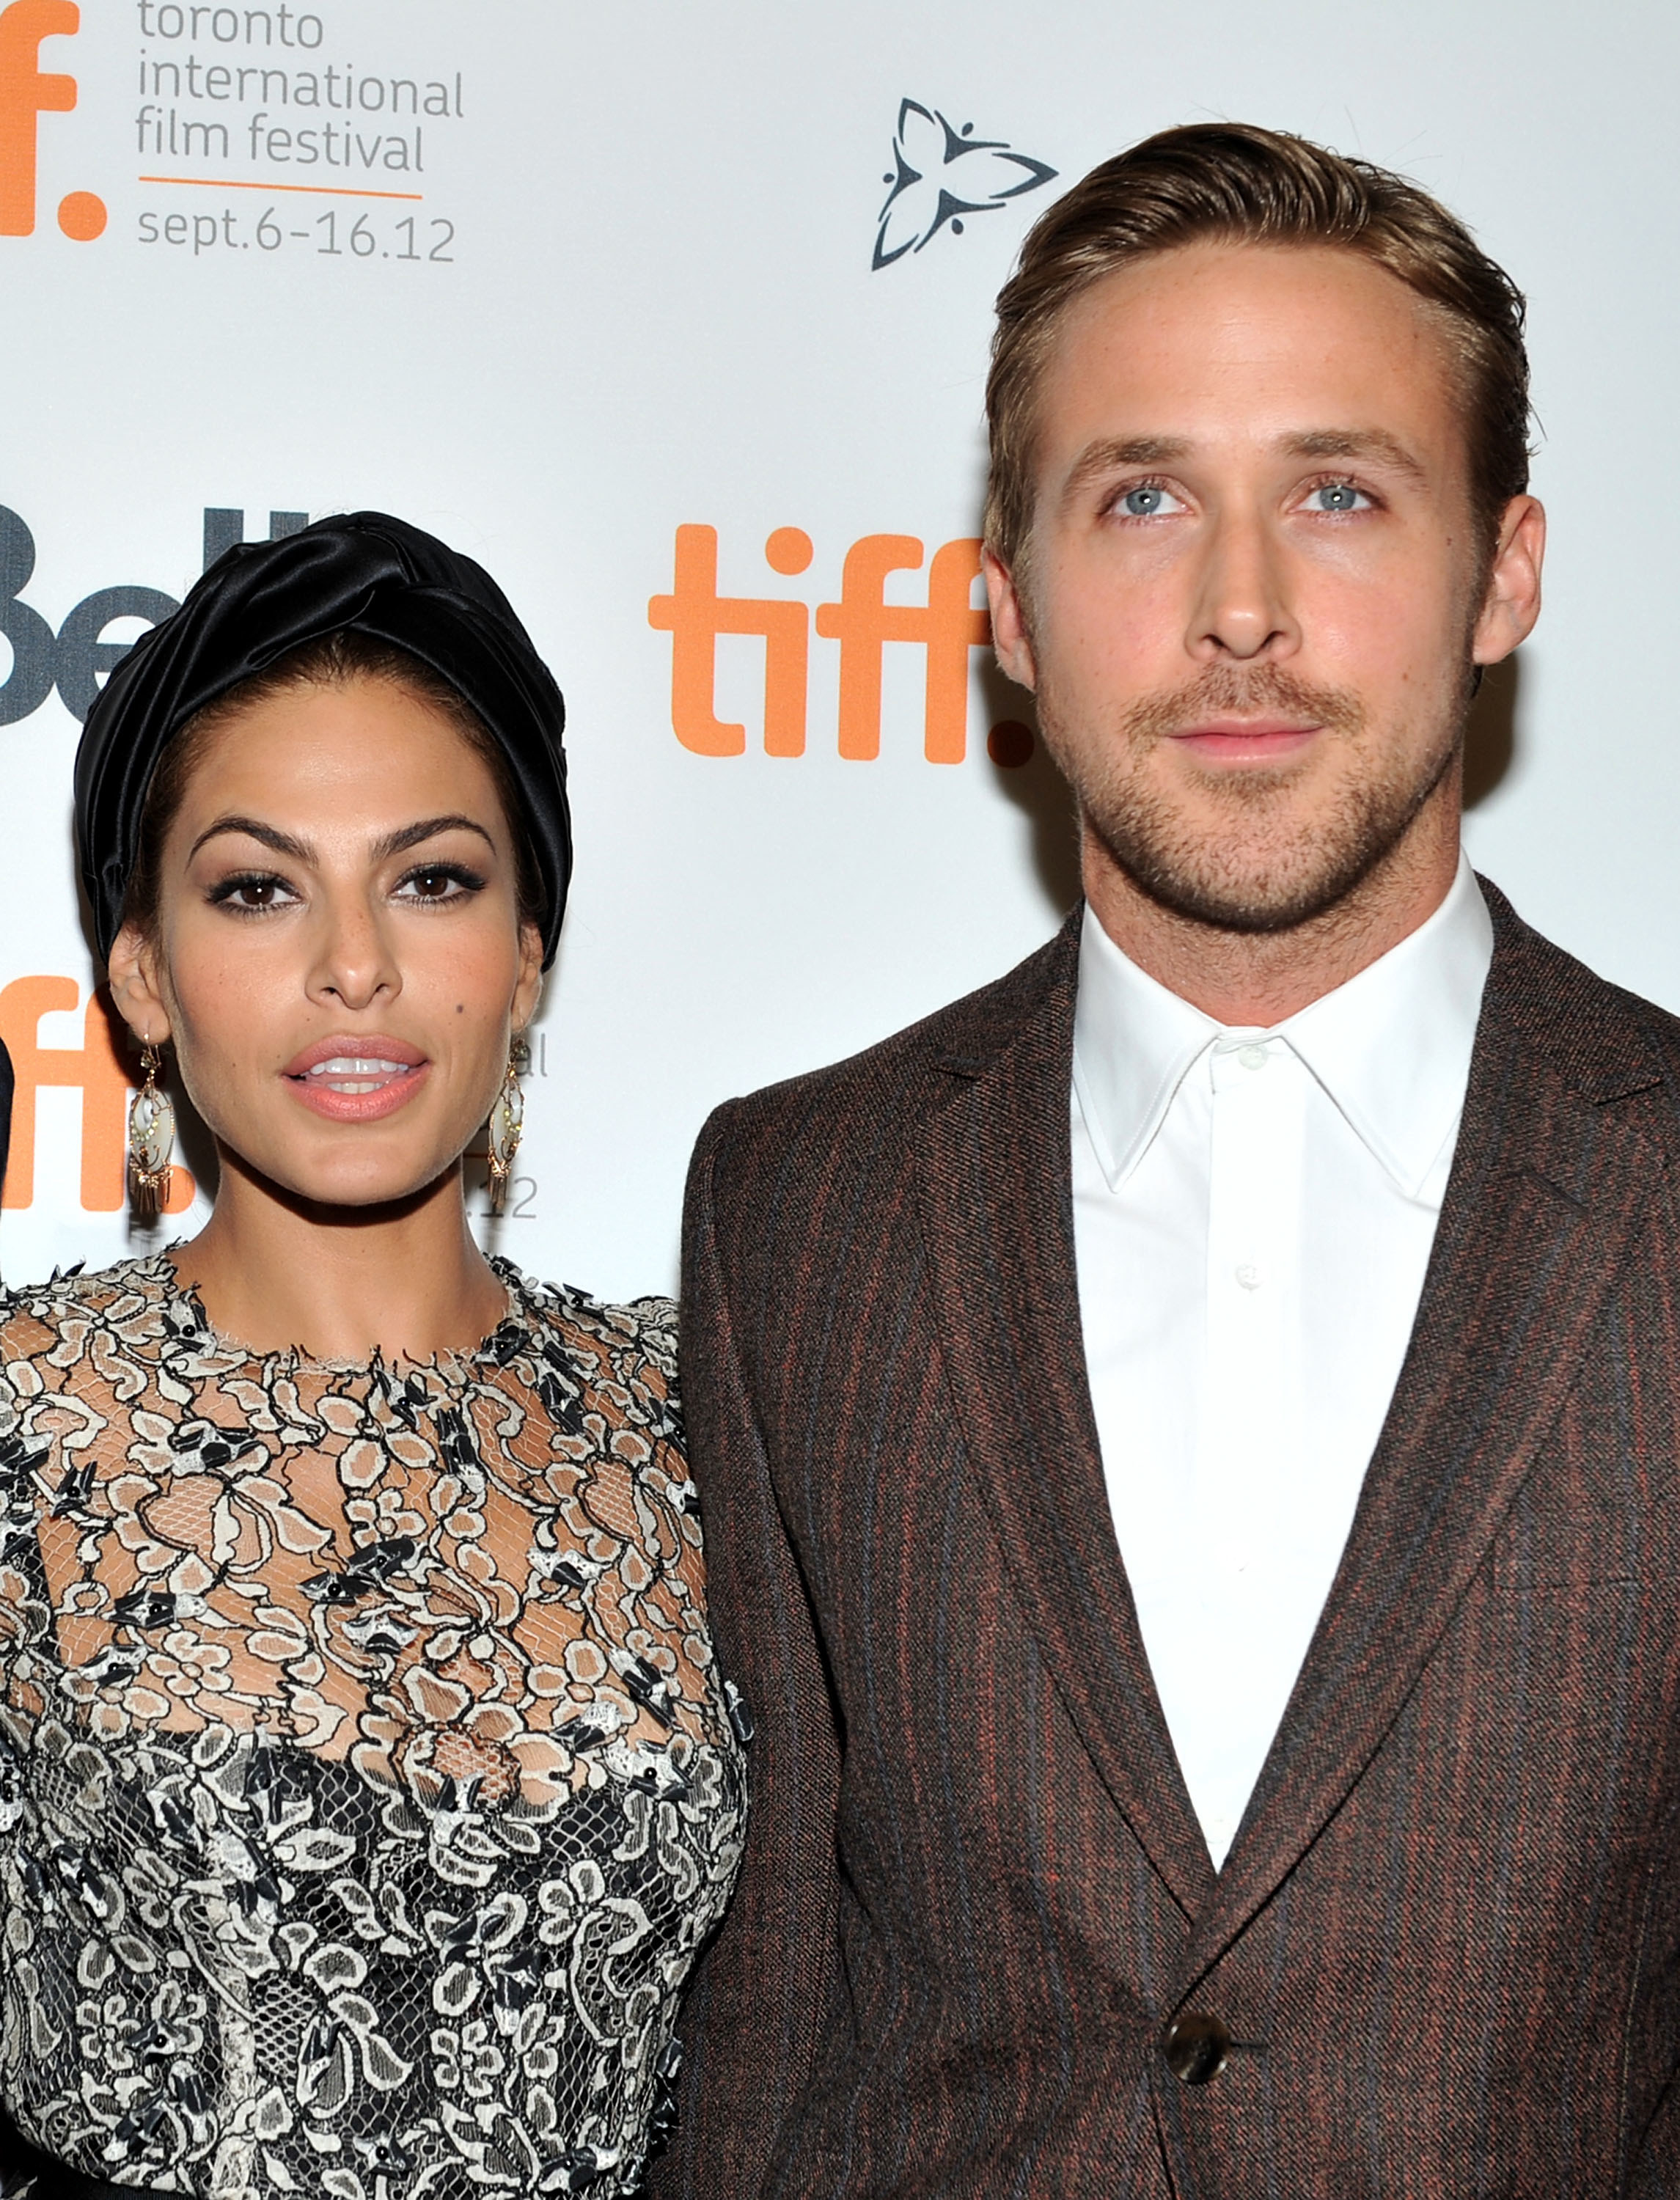 Eva Mendes and Ryan Gosling posing at an event